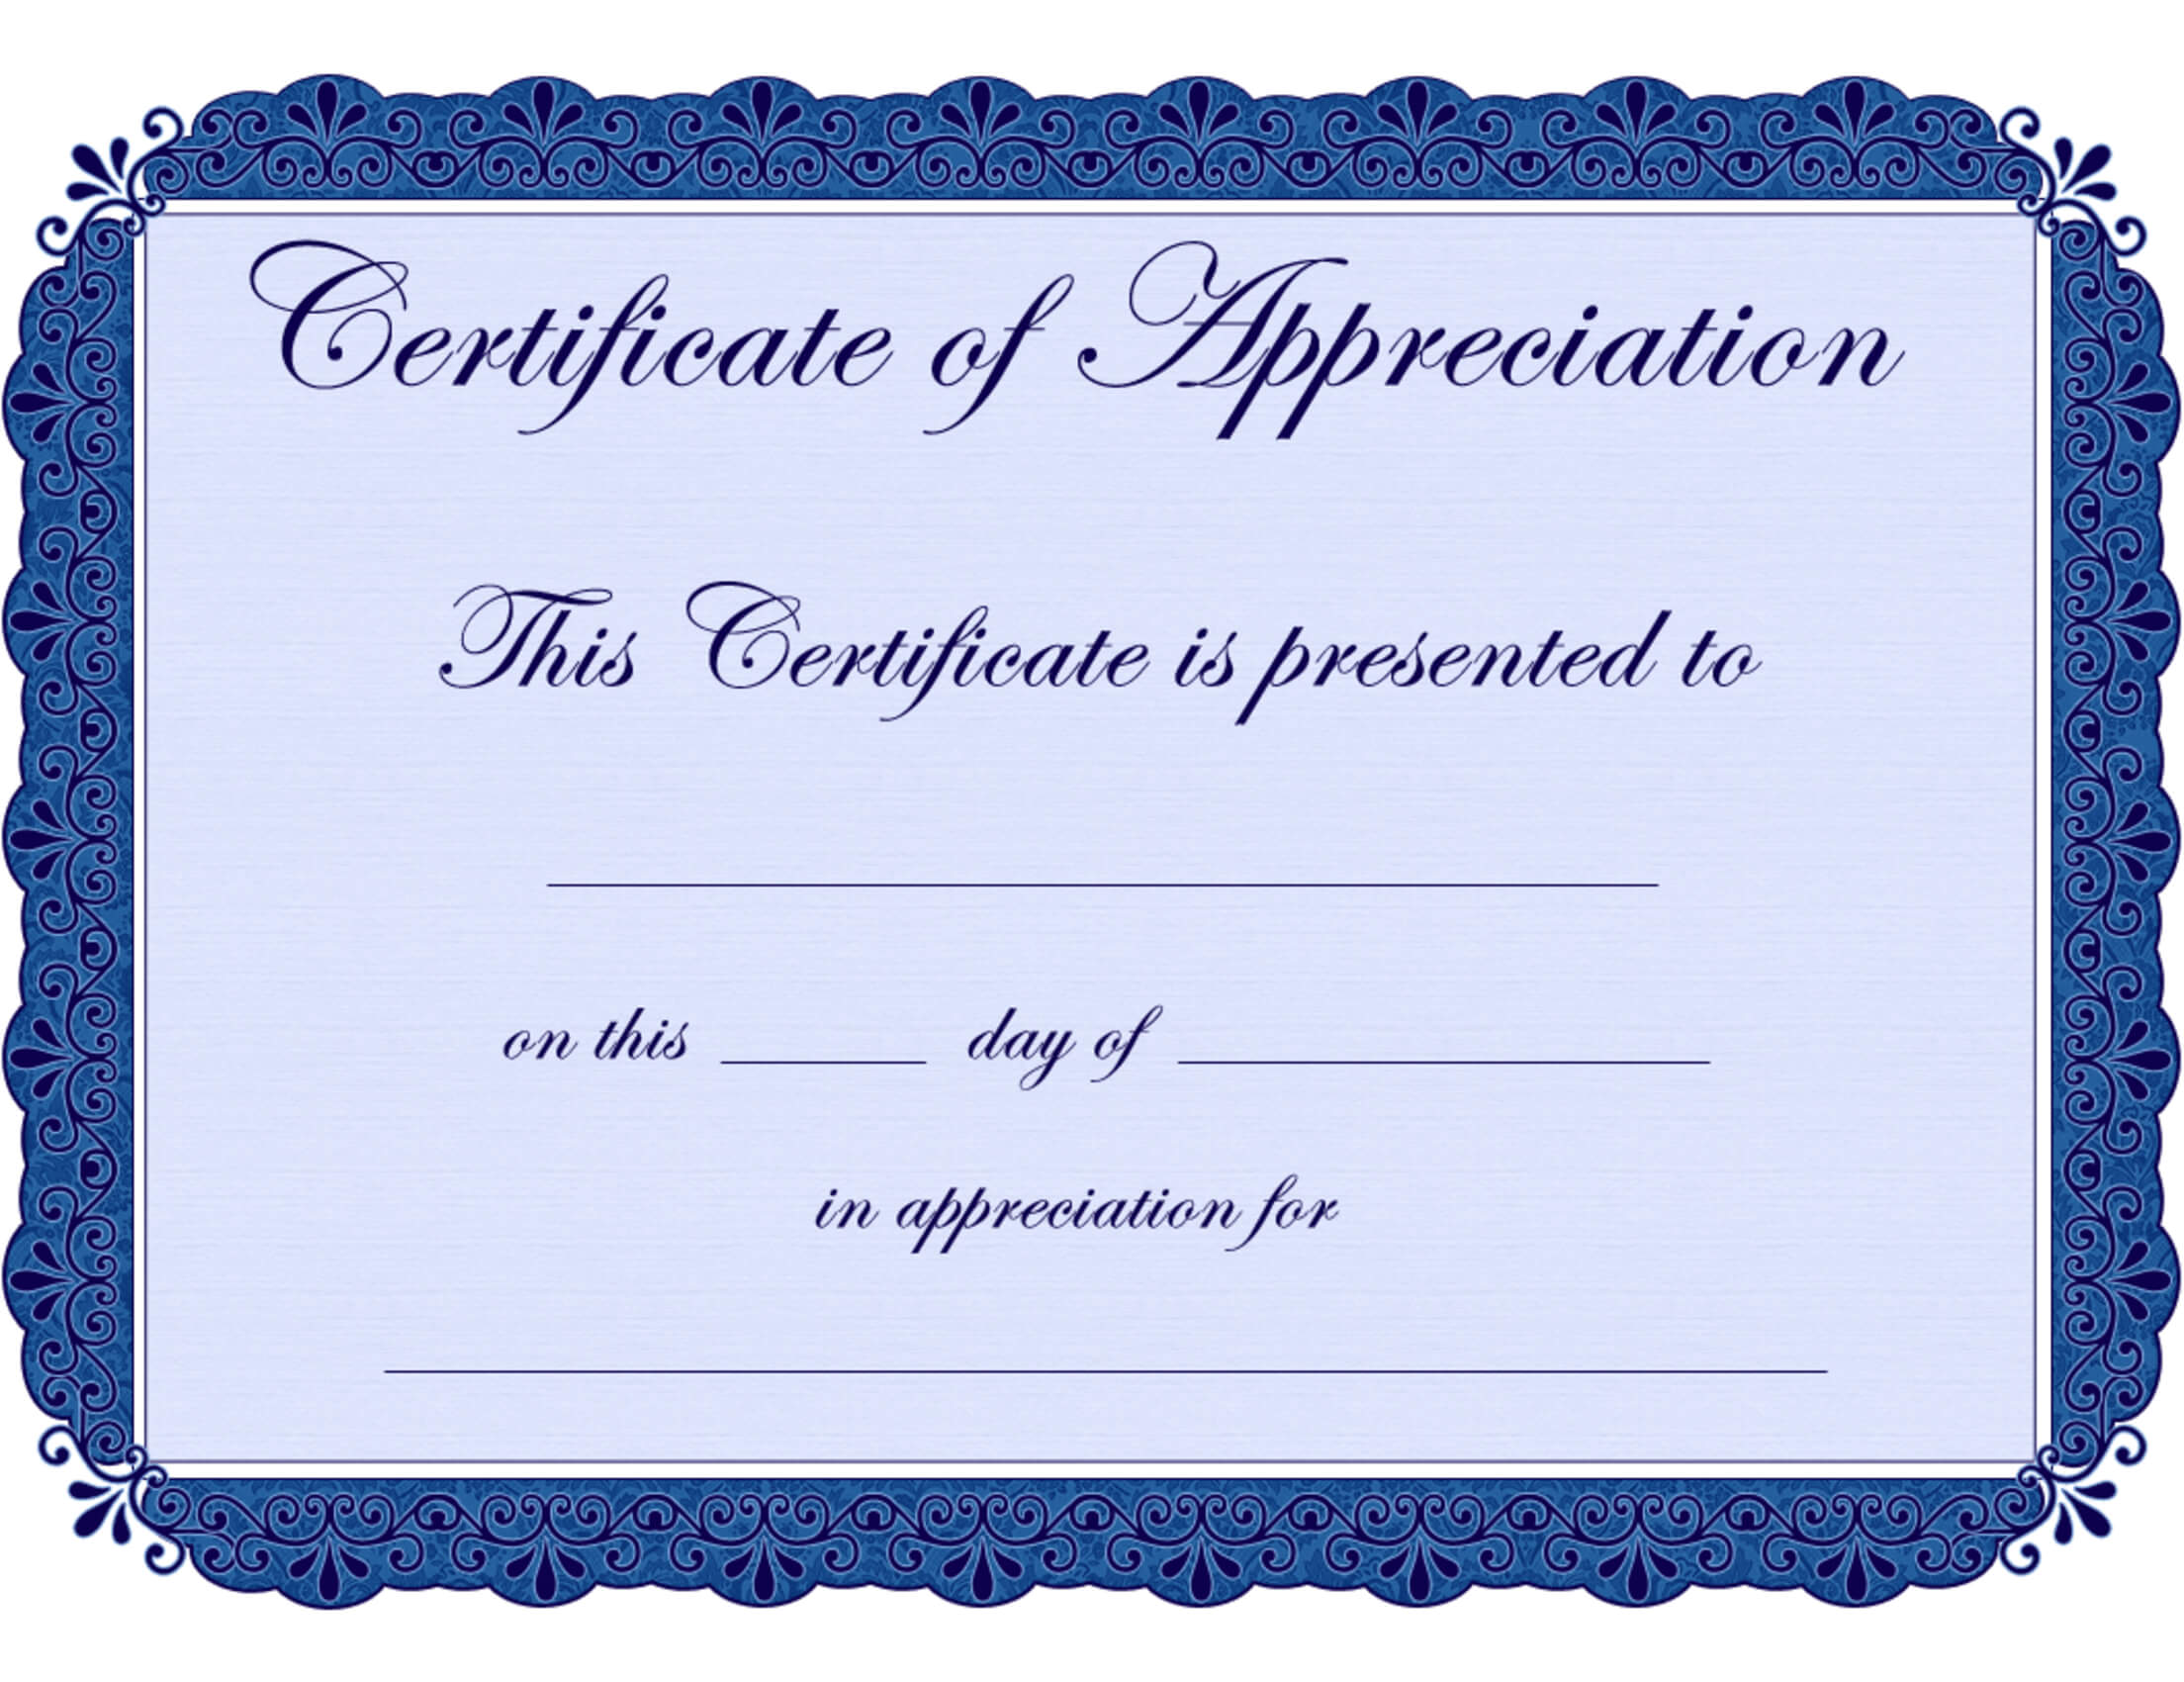 Free Printable Certificates Certificate Of Appreciation With Free Printable Certificate Of Achievement Template